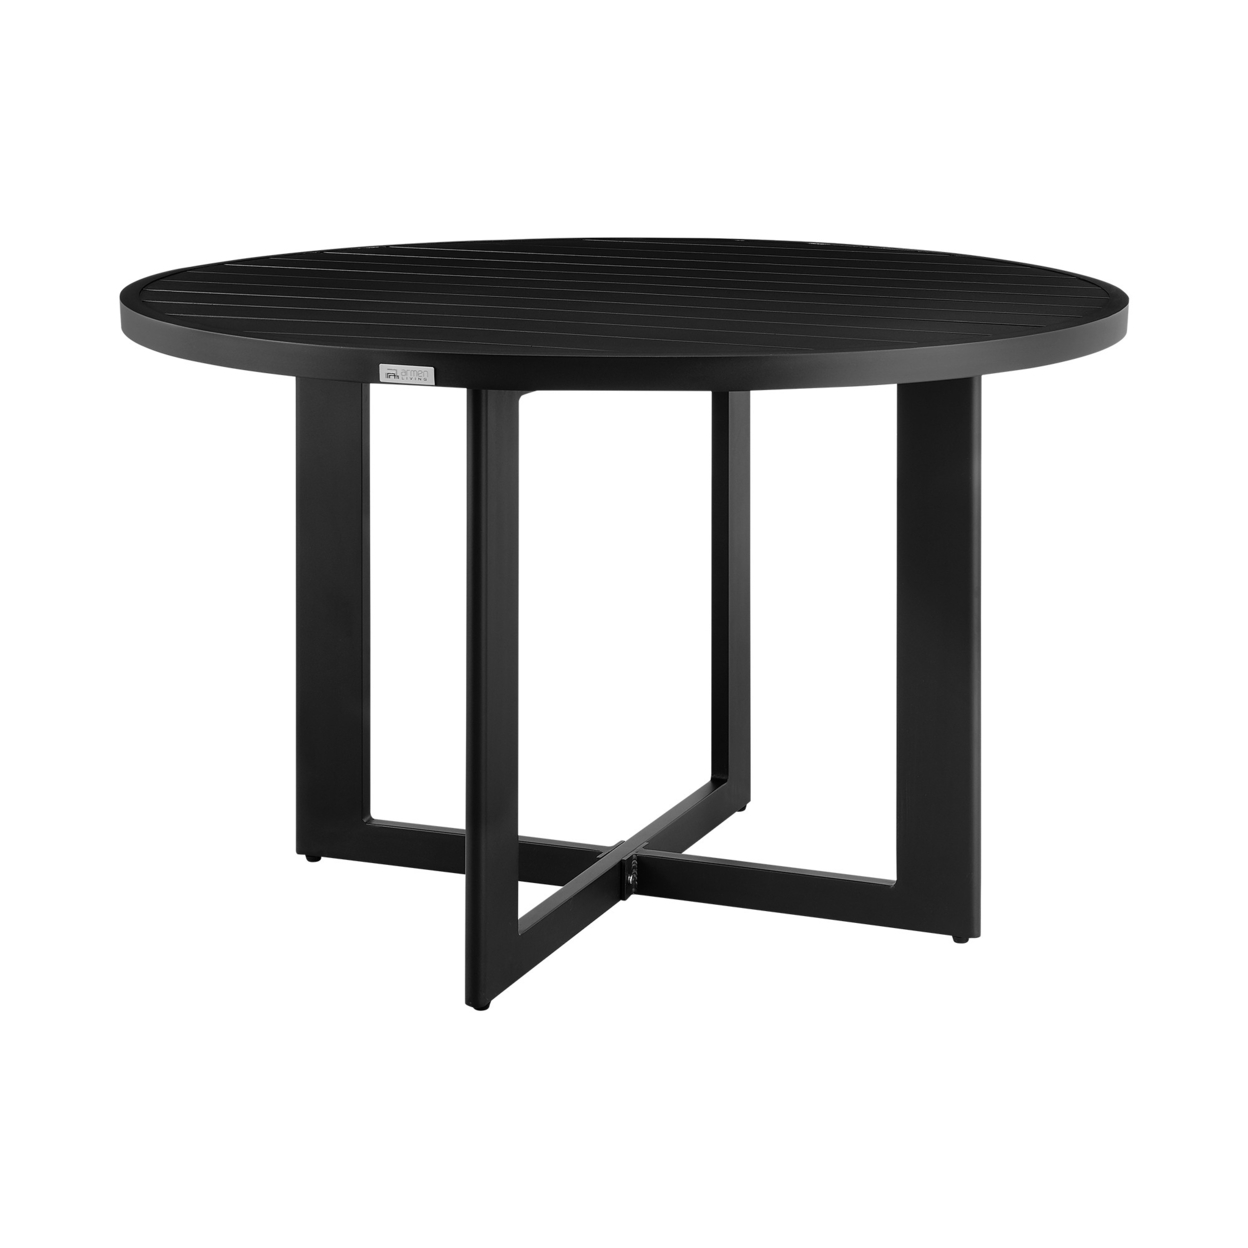 Ollie 48 Inch Patio Dining Table, Aluminum Frame And Round Tabletop, Black- Saltoro Sherpi